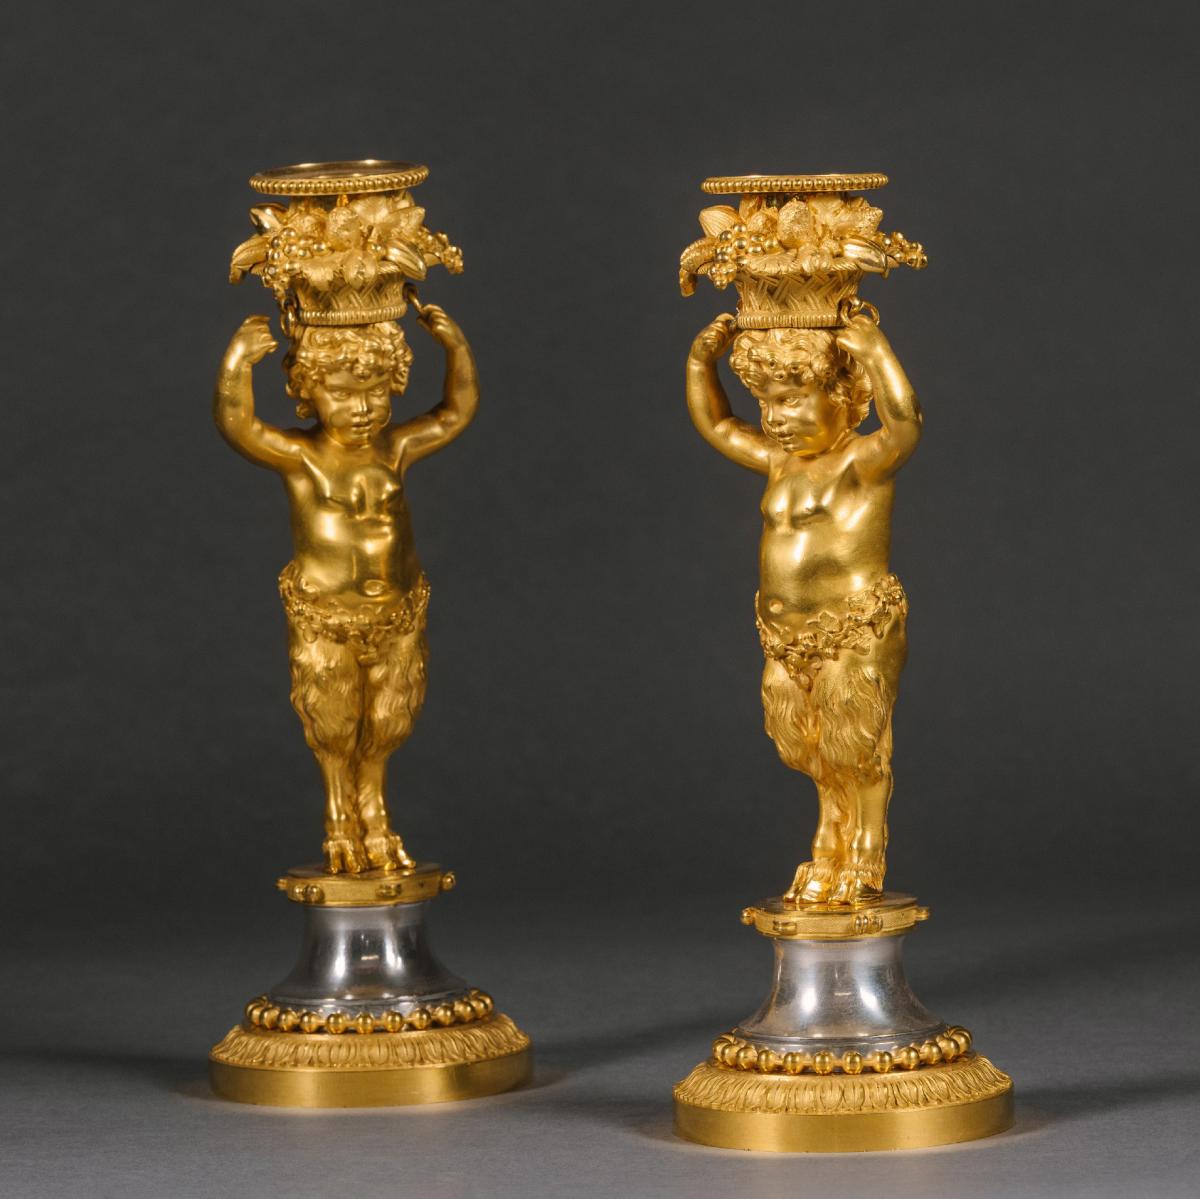 A Pair of Louis XVI Style Gilt-Bronze and Polished Steel Candlesticks By Maison Beurdeley.